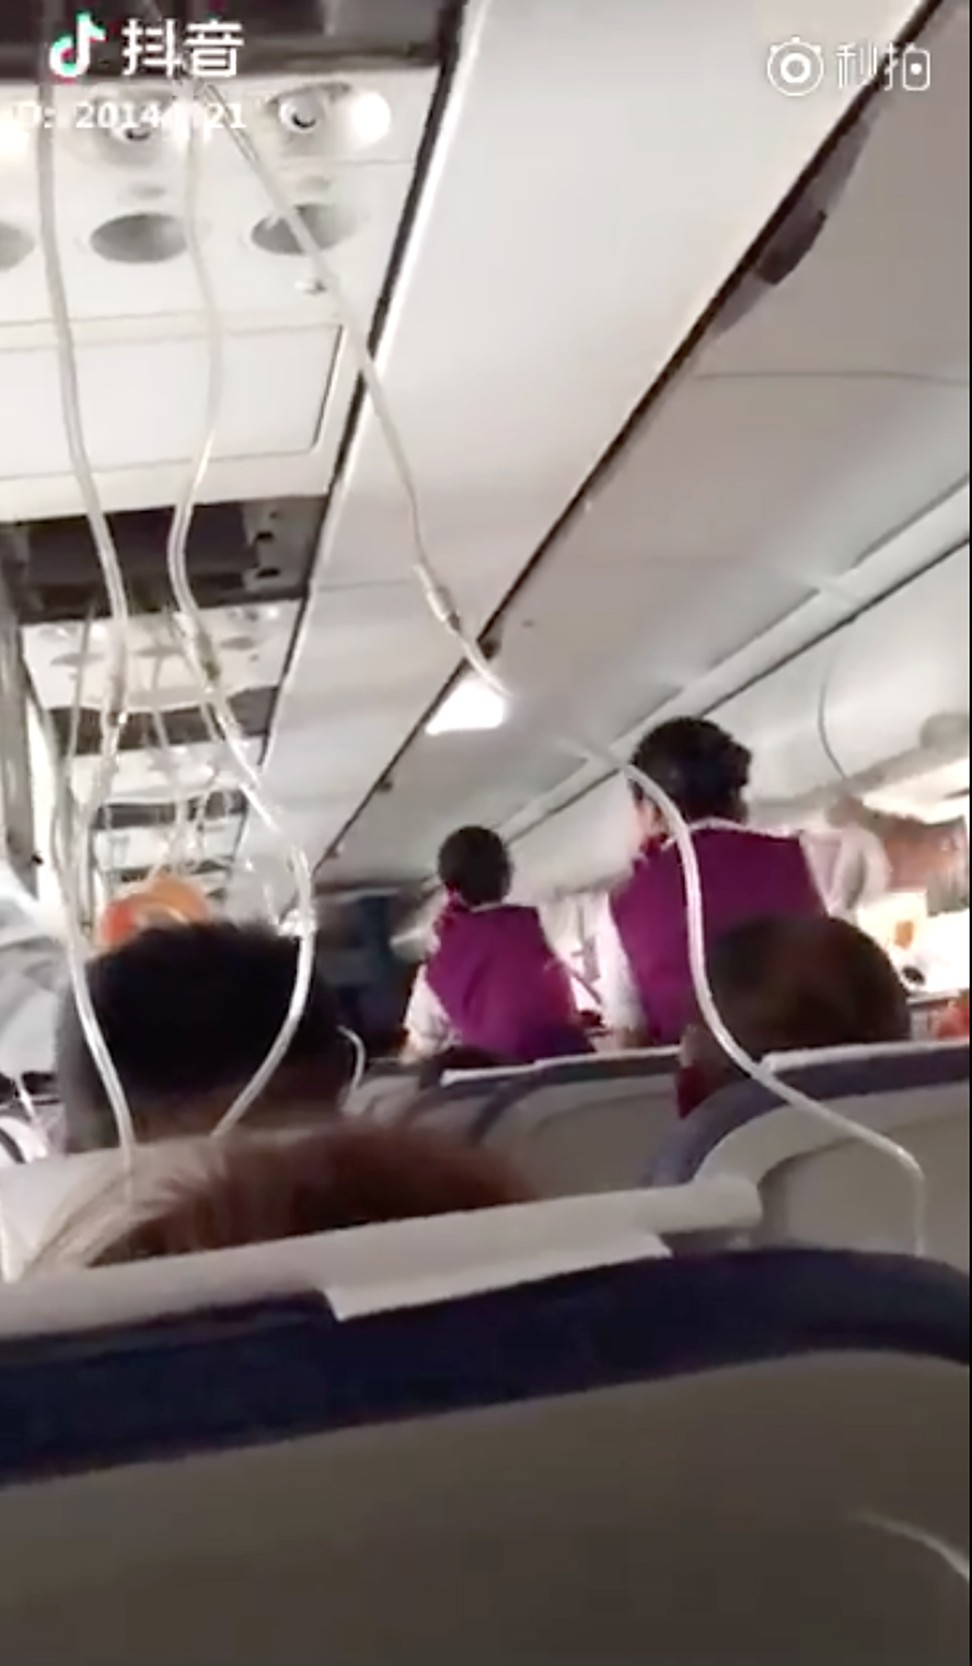 Oxygen masks were deployed when the cockpit window fell out. Photo: Weibo